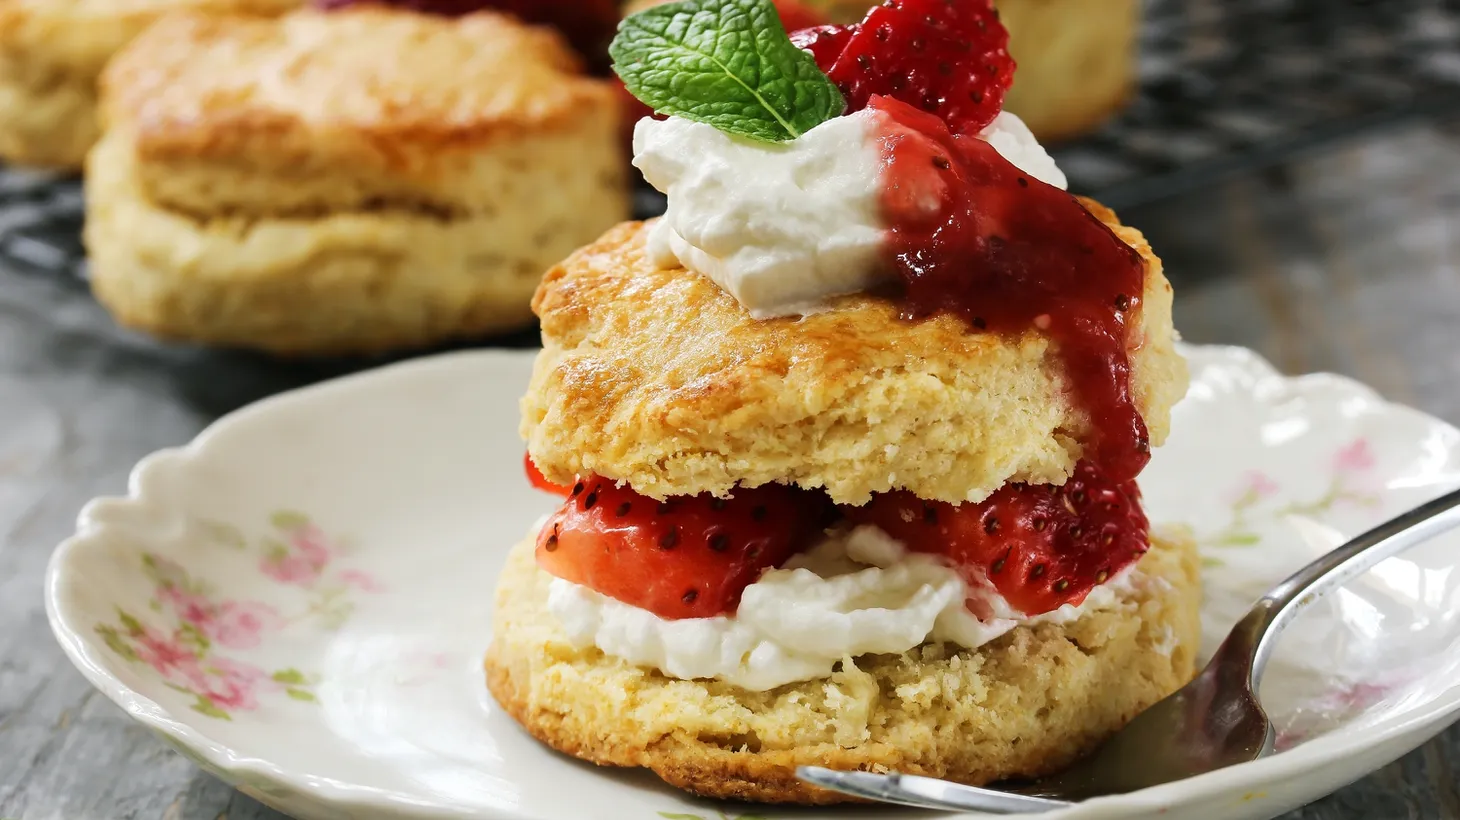 Strawberry “scone” cakes are a wonderful variation for spring.